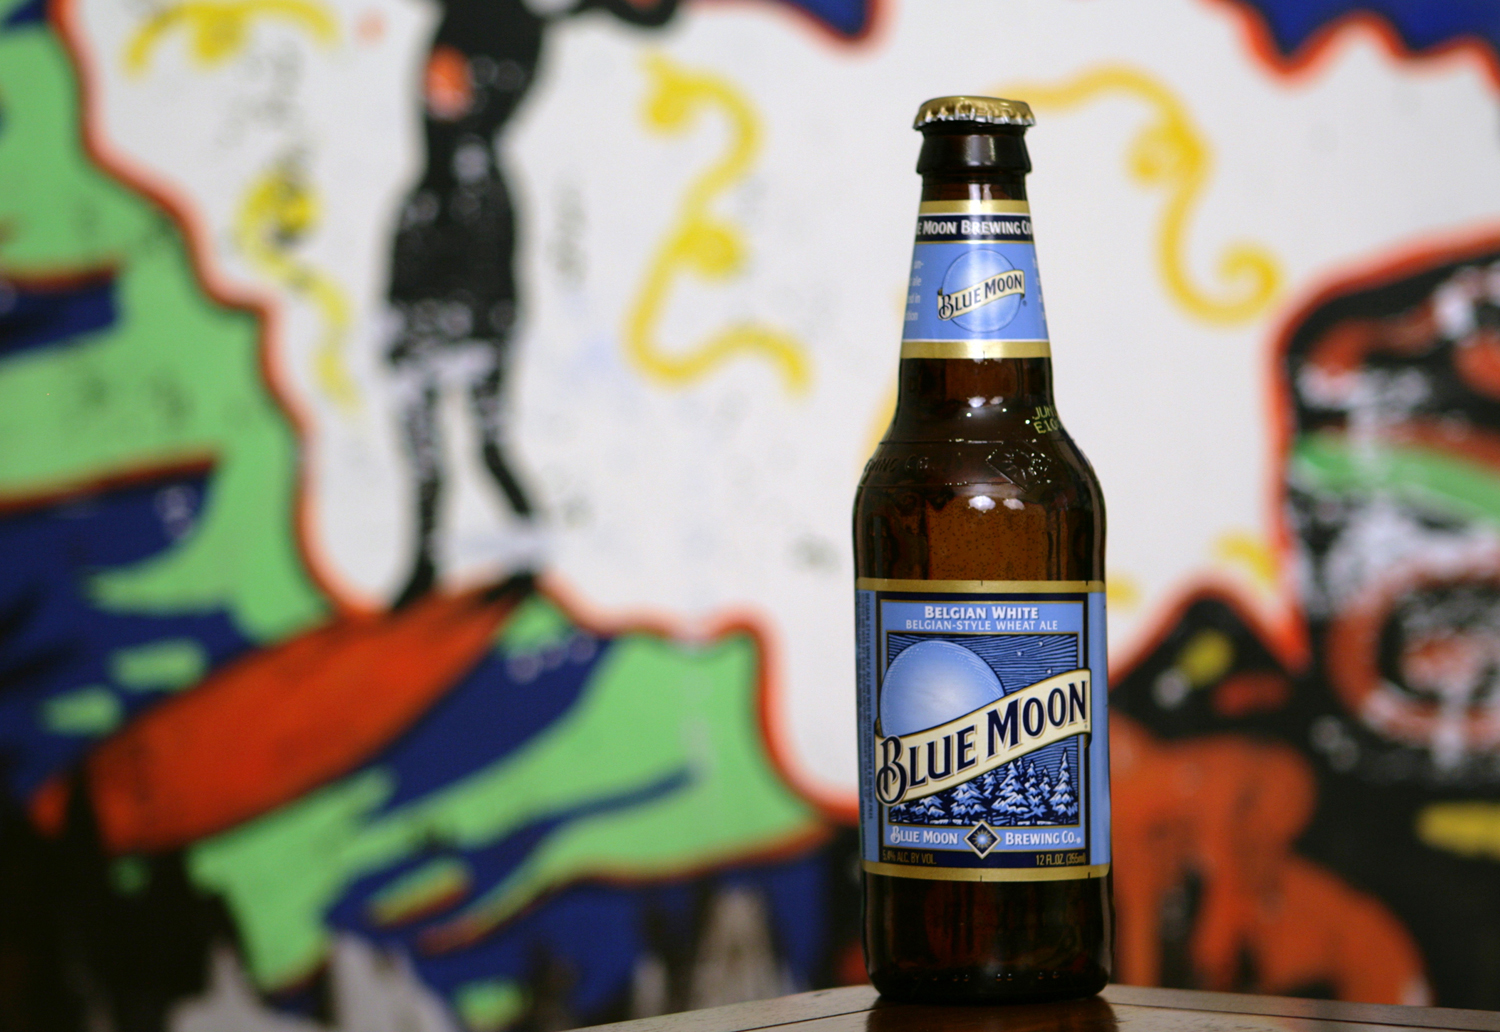 Summer Blue Moon Beer will make your season great.